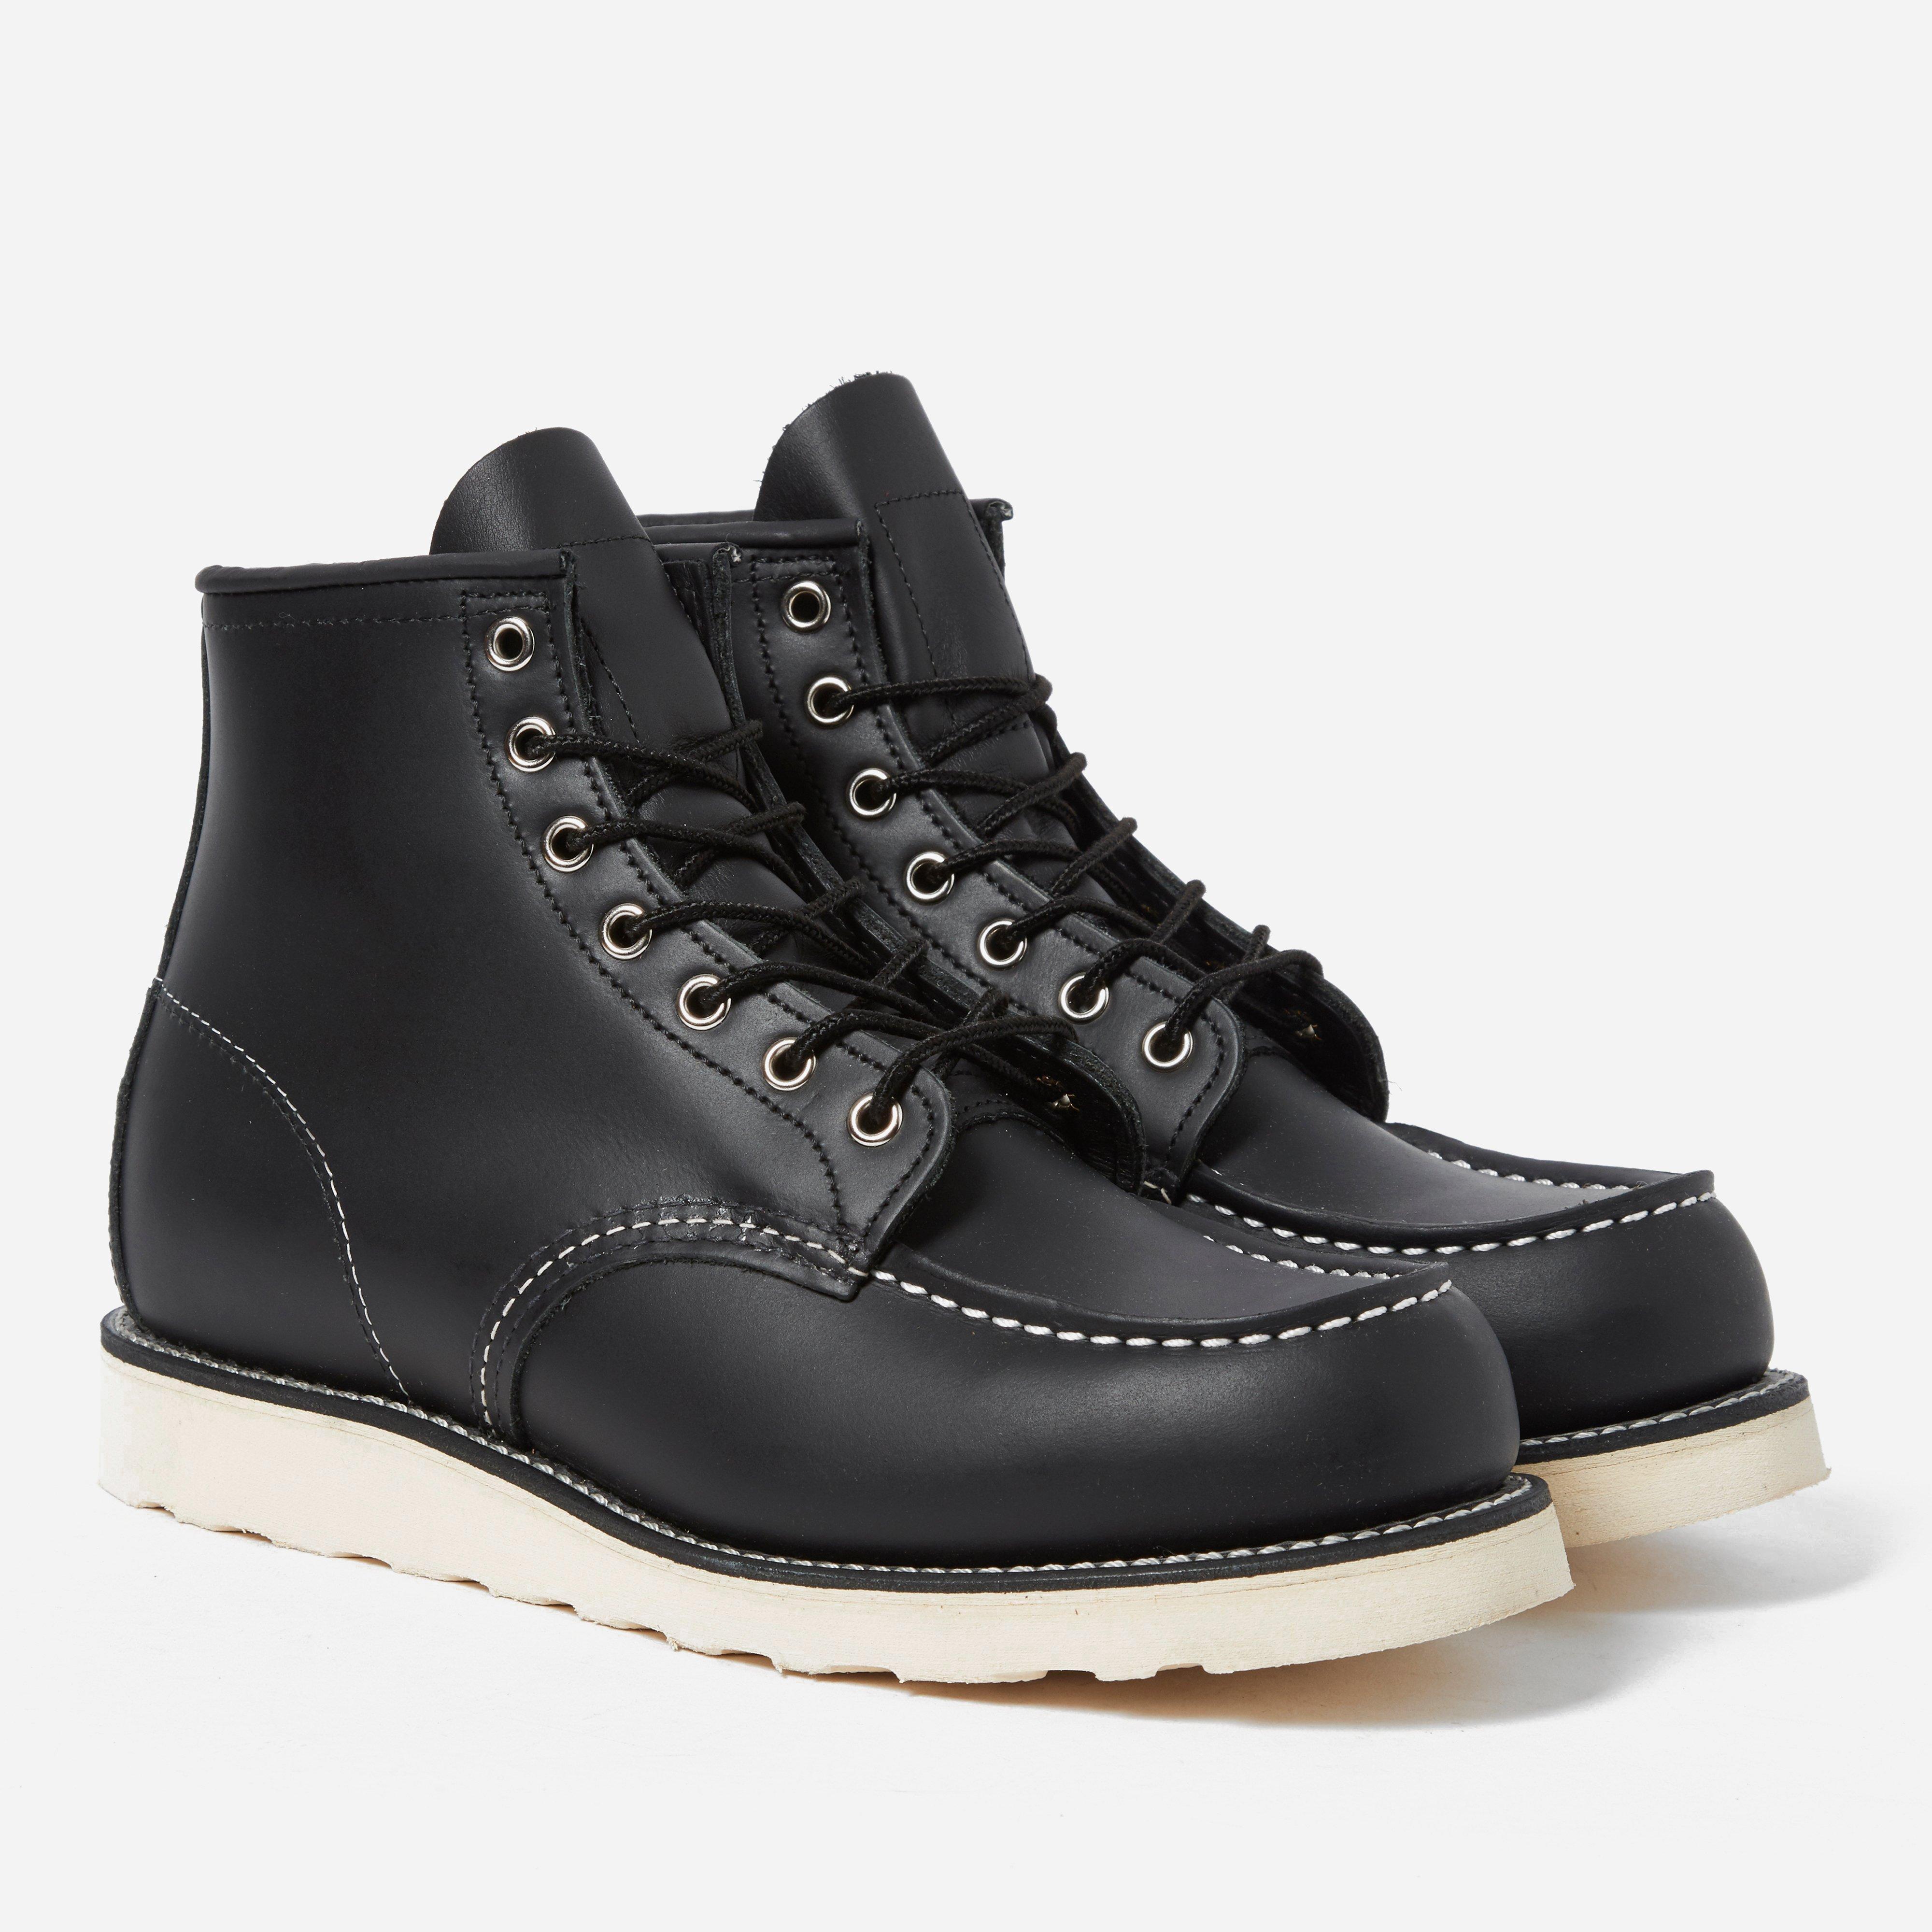 Red Wing 08130 6'' Moc Toe Boot in Black for Men - Lyst